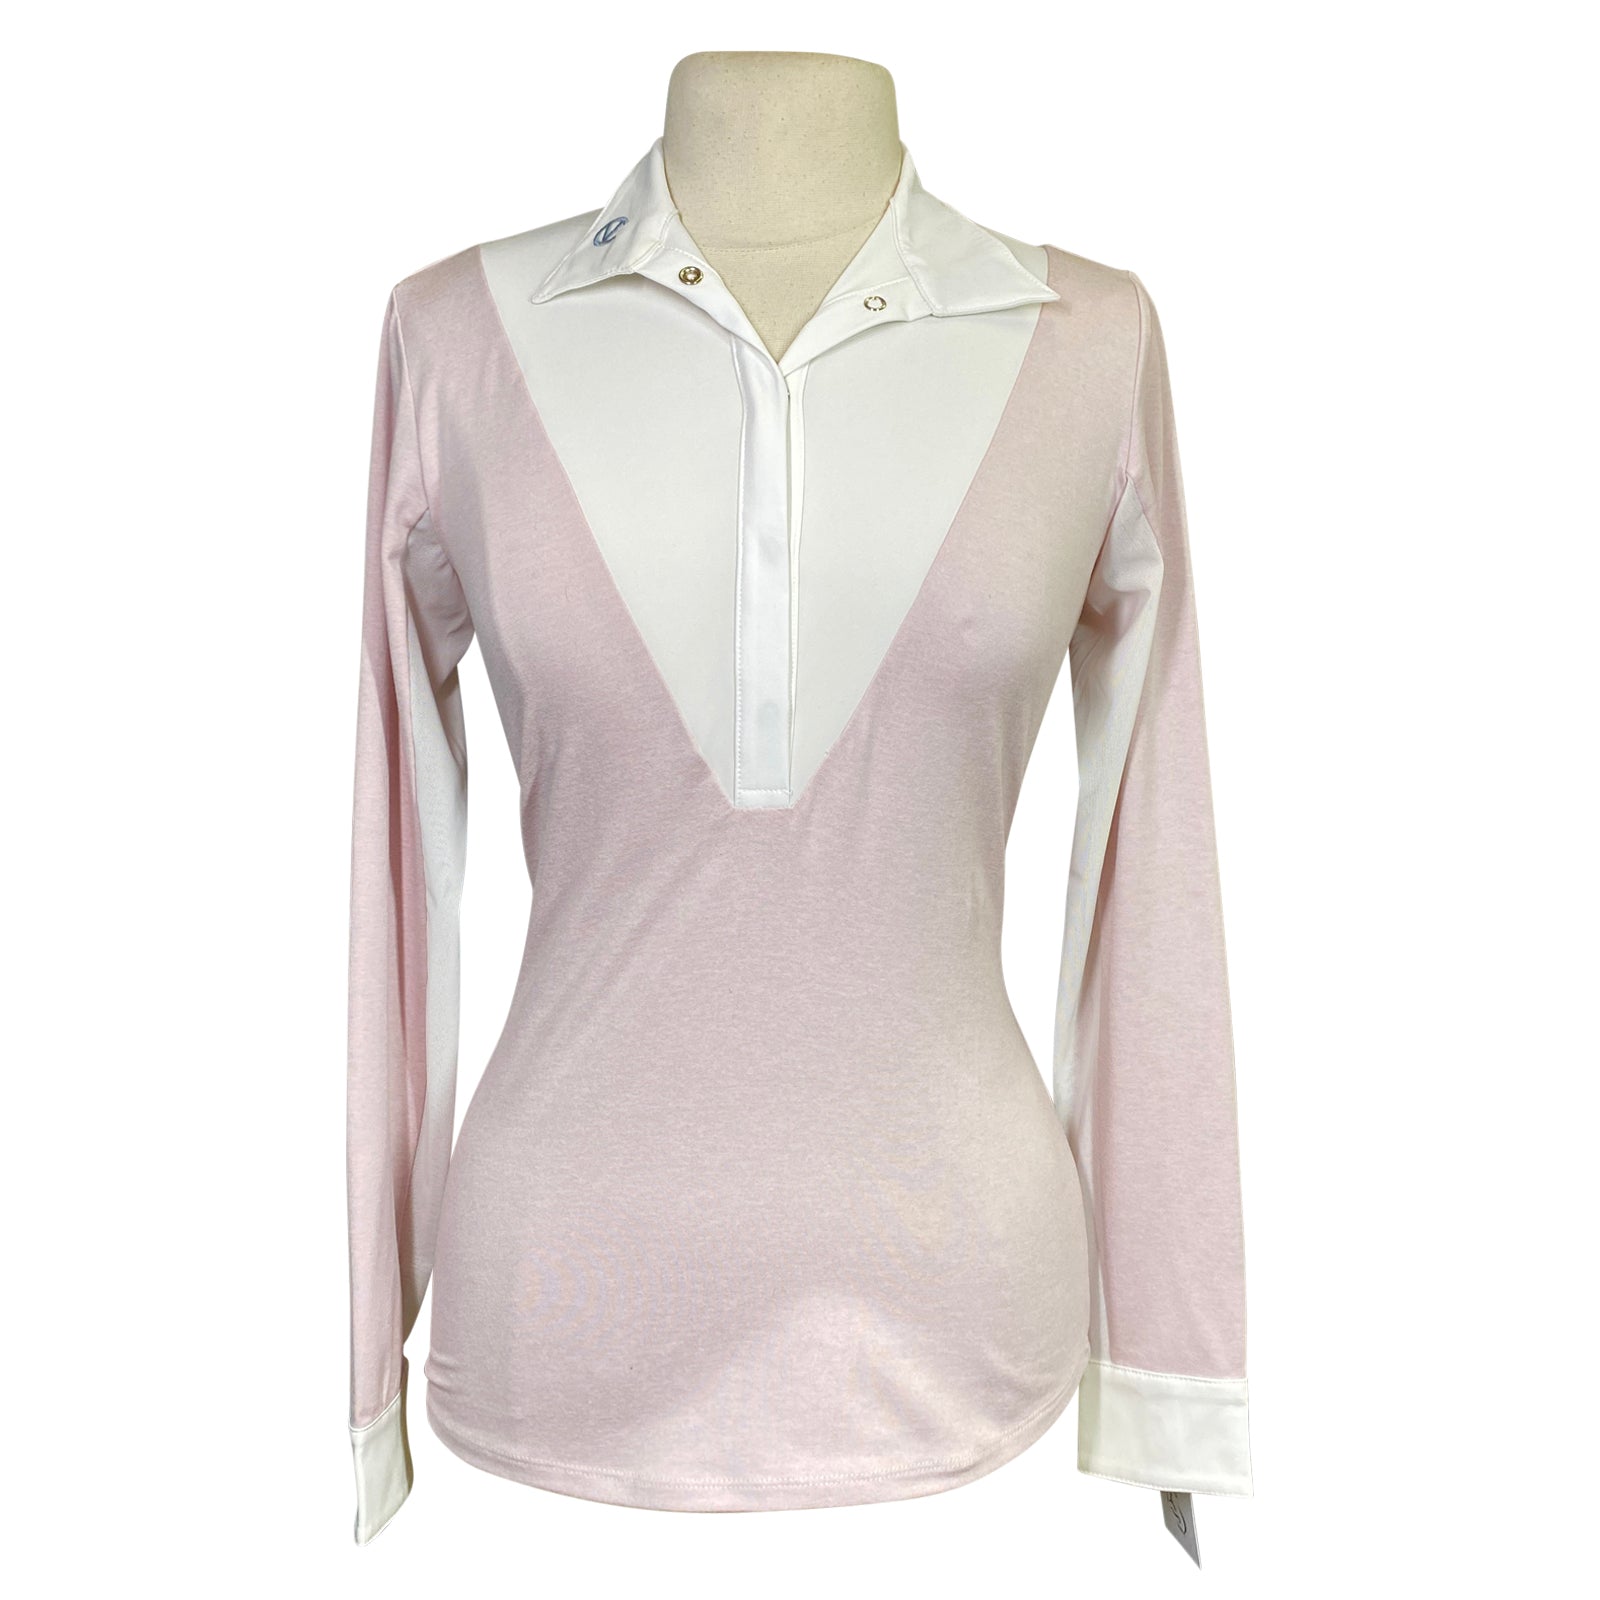 Calverro 'Victory' Competition Shirt in Petal Pink